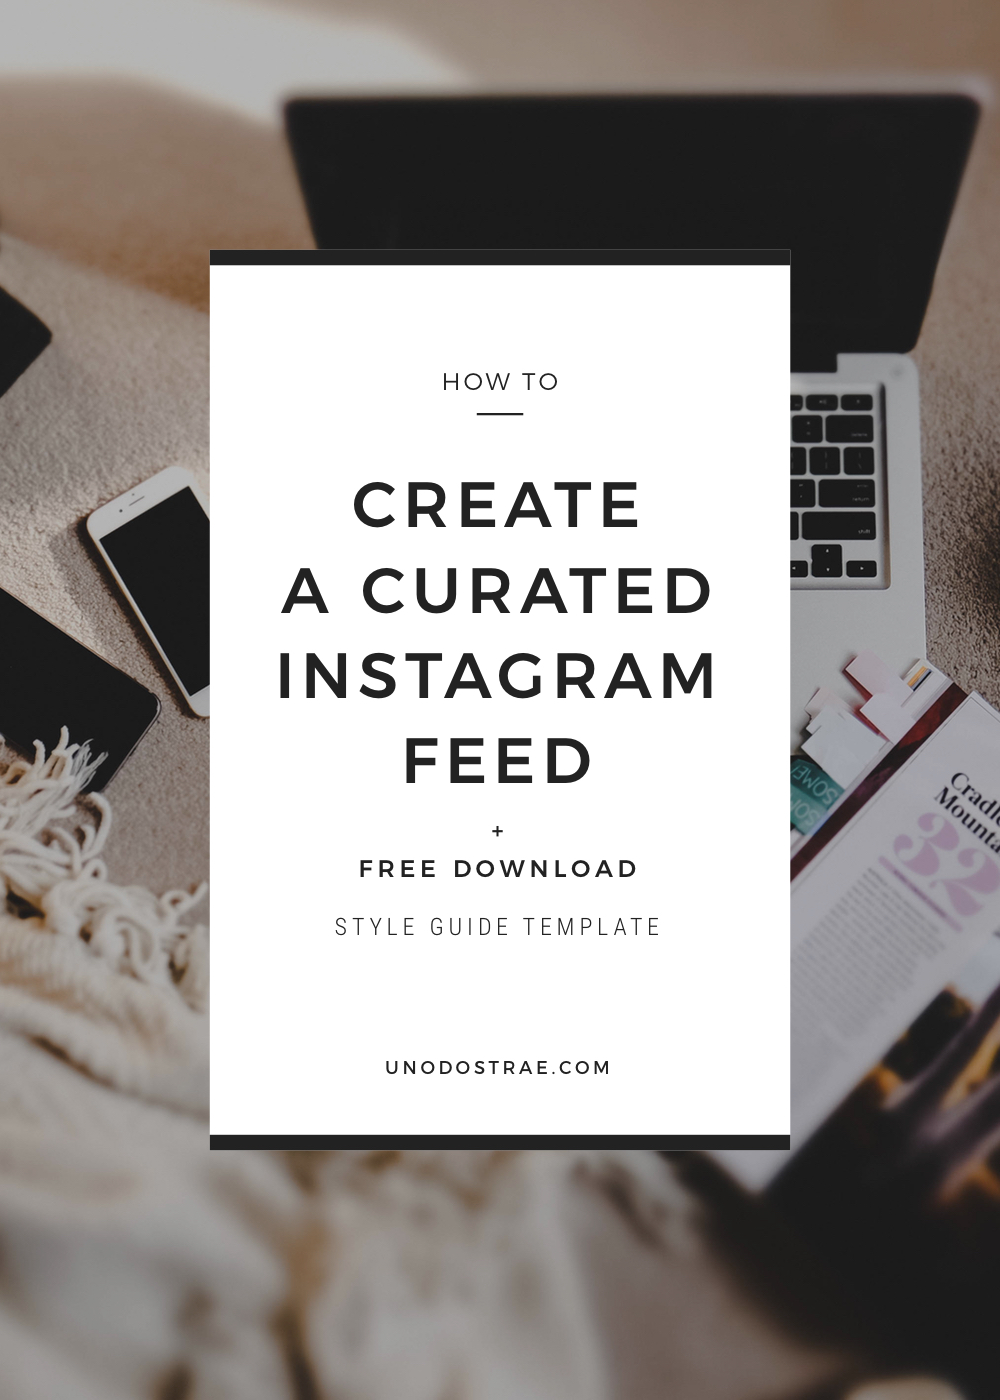 How to create a curated Instagram feed and cohesive aesthetic | unodostrae.com